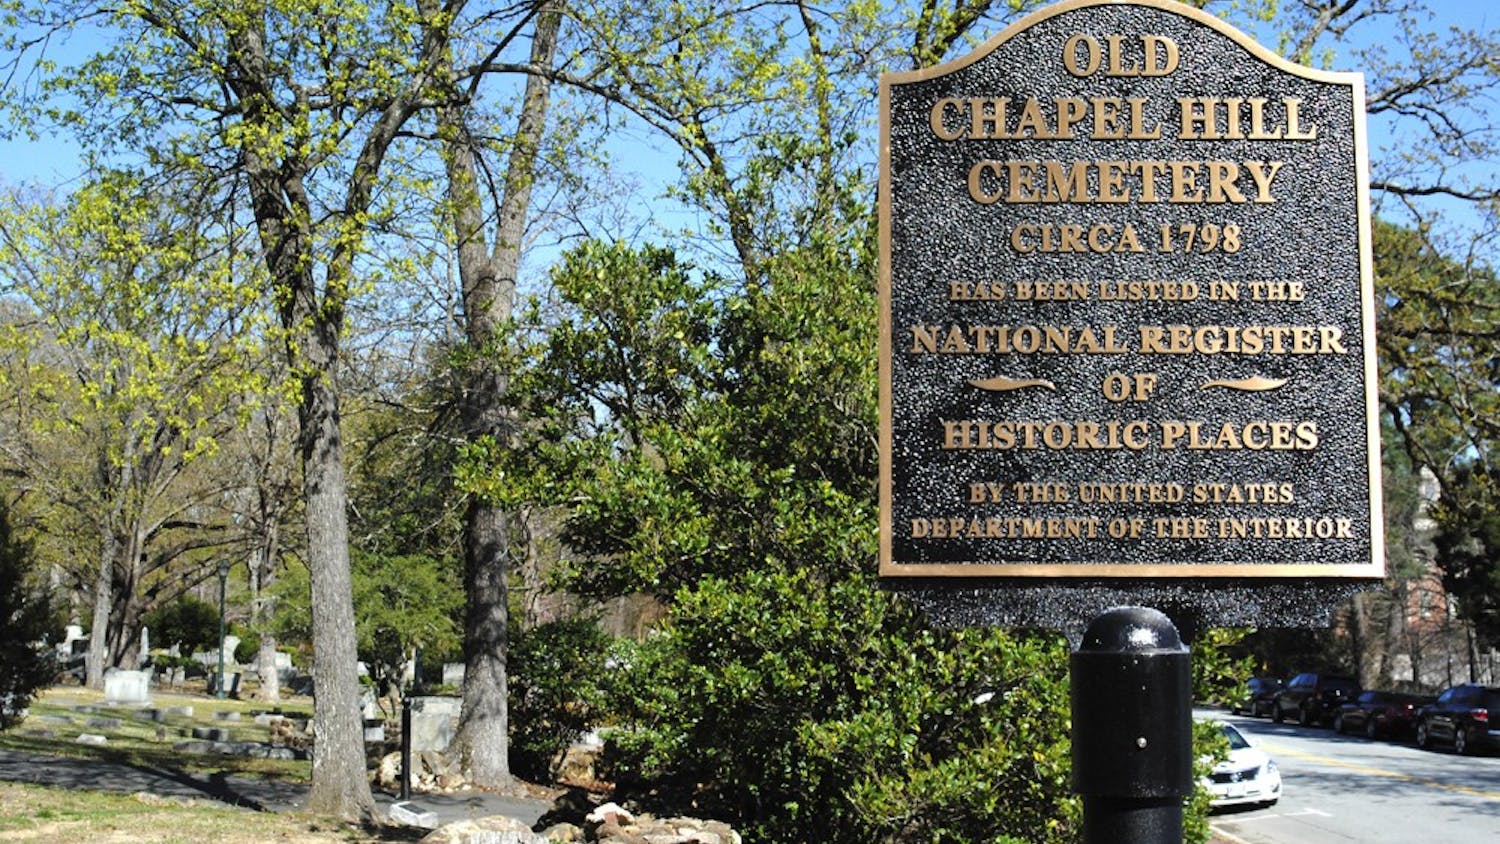 Old Chapel Hill Cemetery is recognized by the National Registry of Historic Places, unlike other cemeteries.